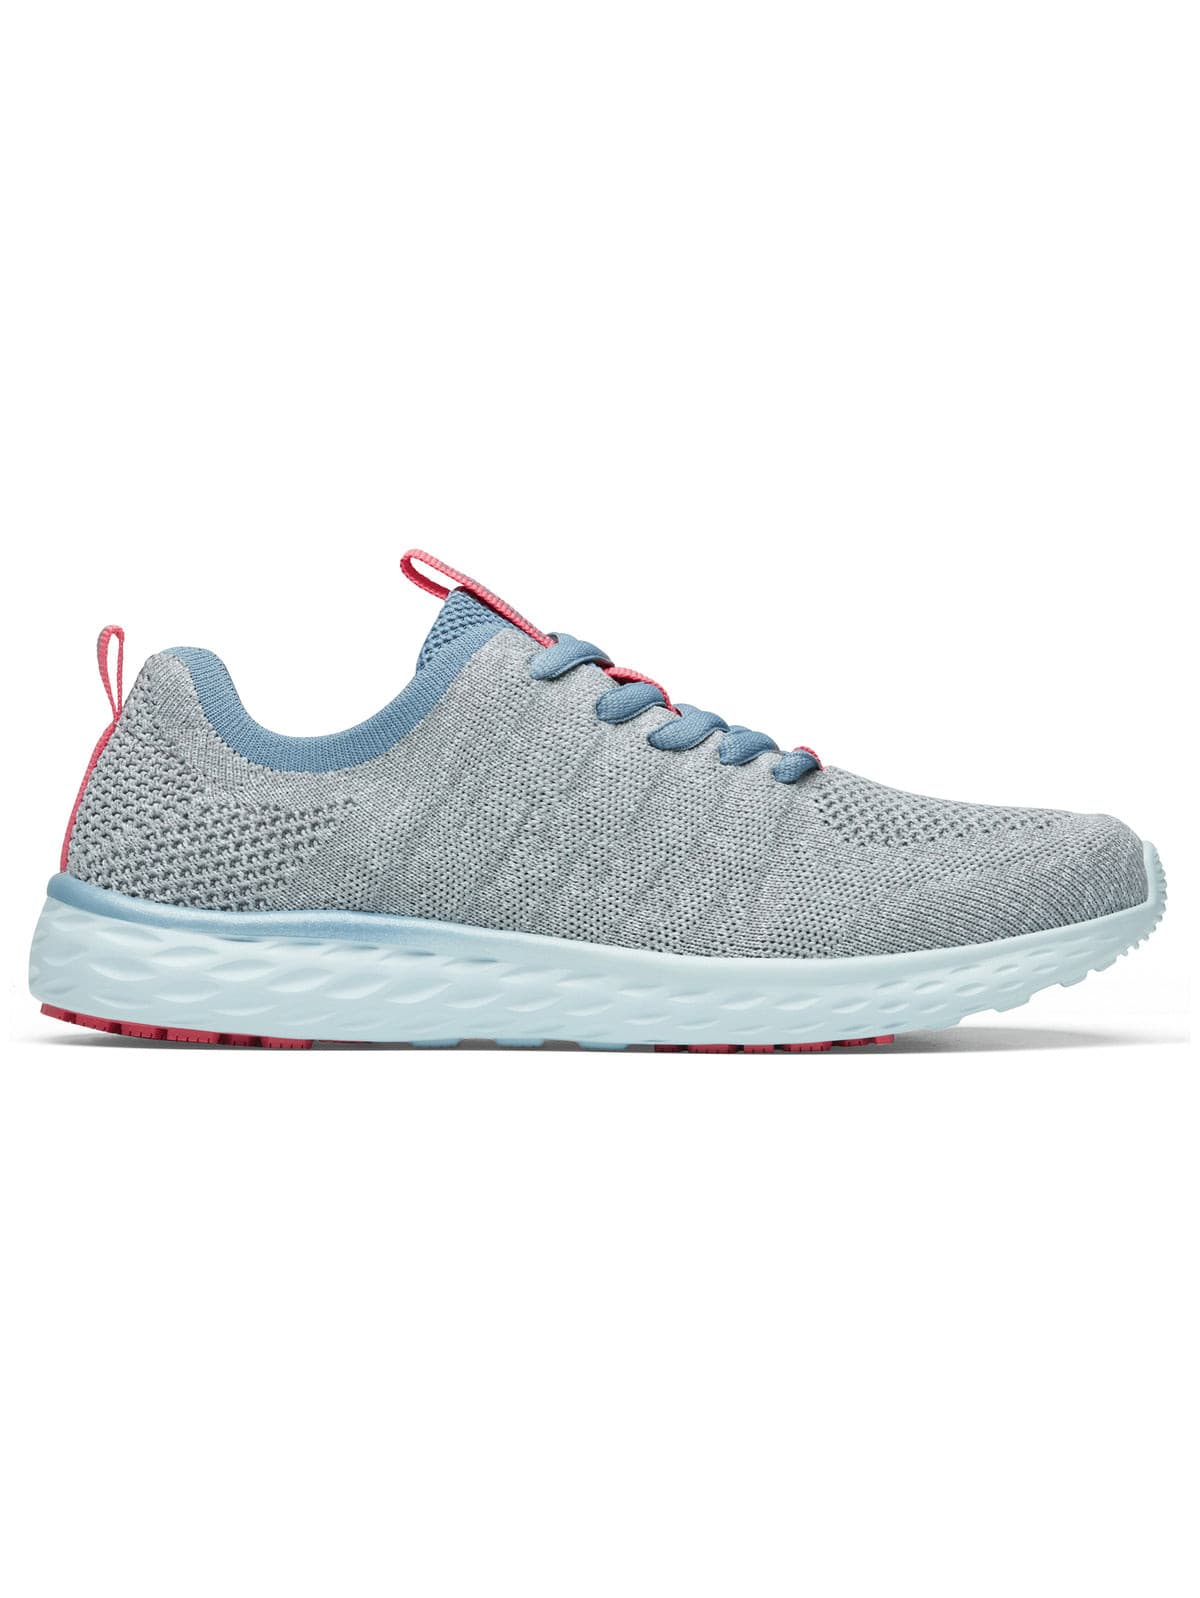 Women's Work Shoe Everlight Gray Blue Coral by Shoes For Crews -  ChefsCotton